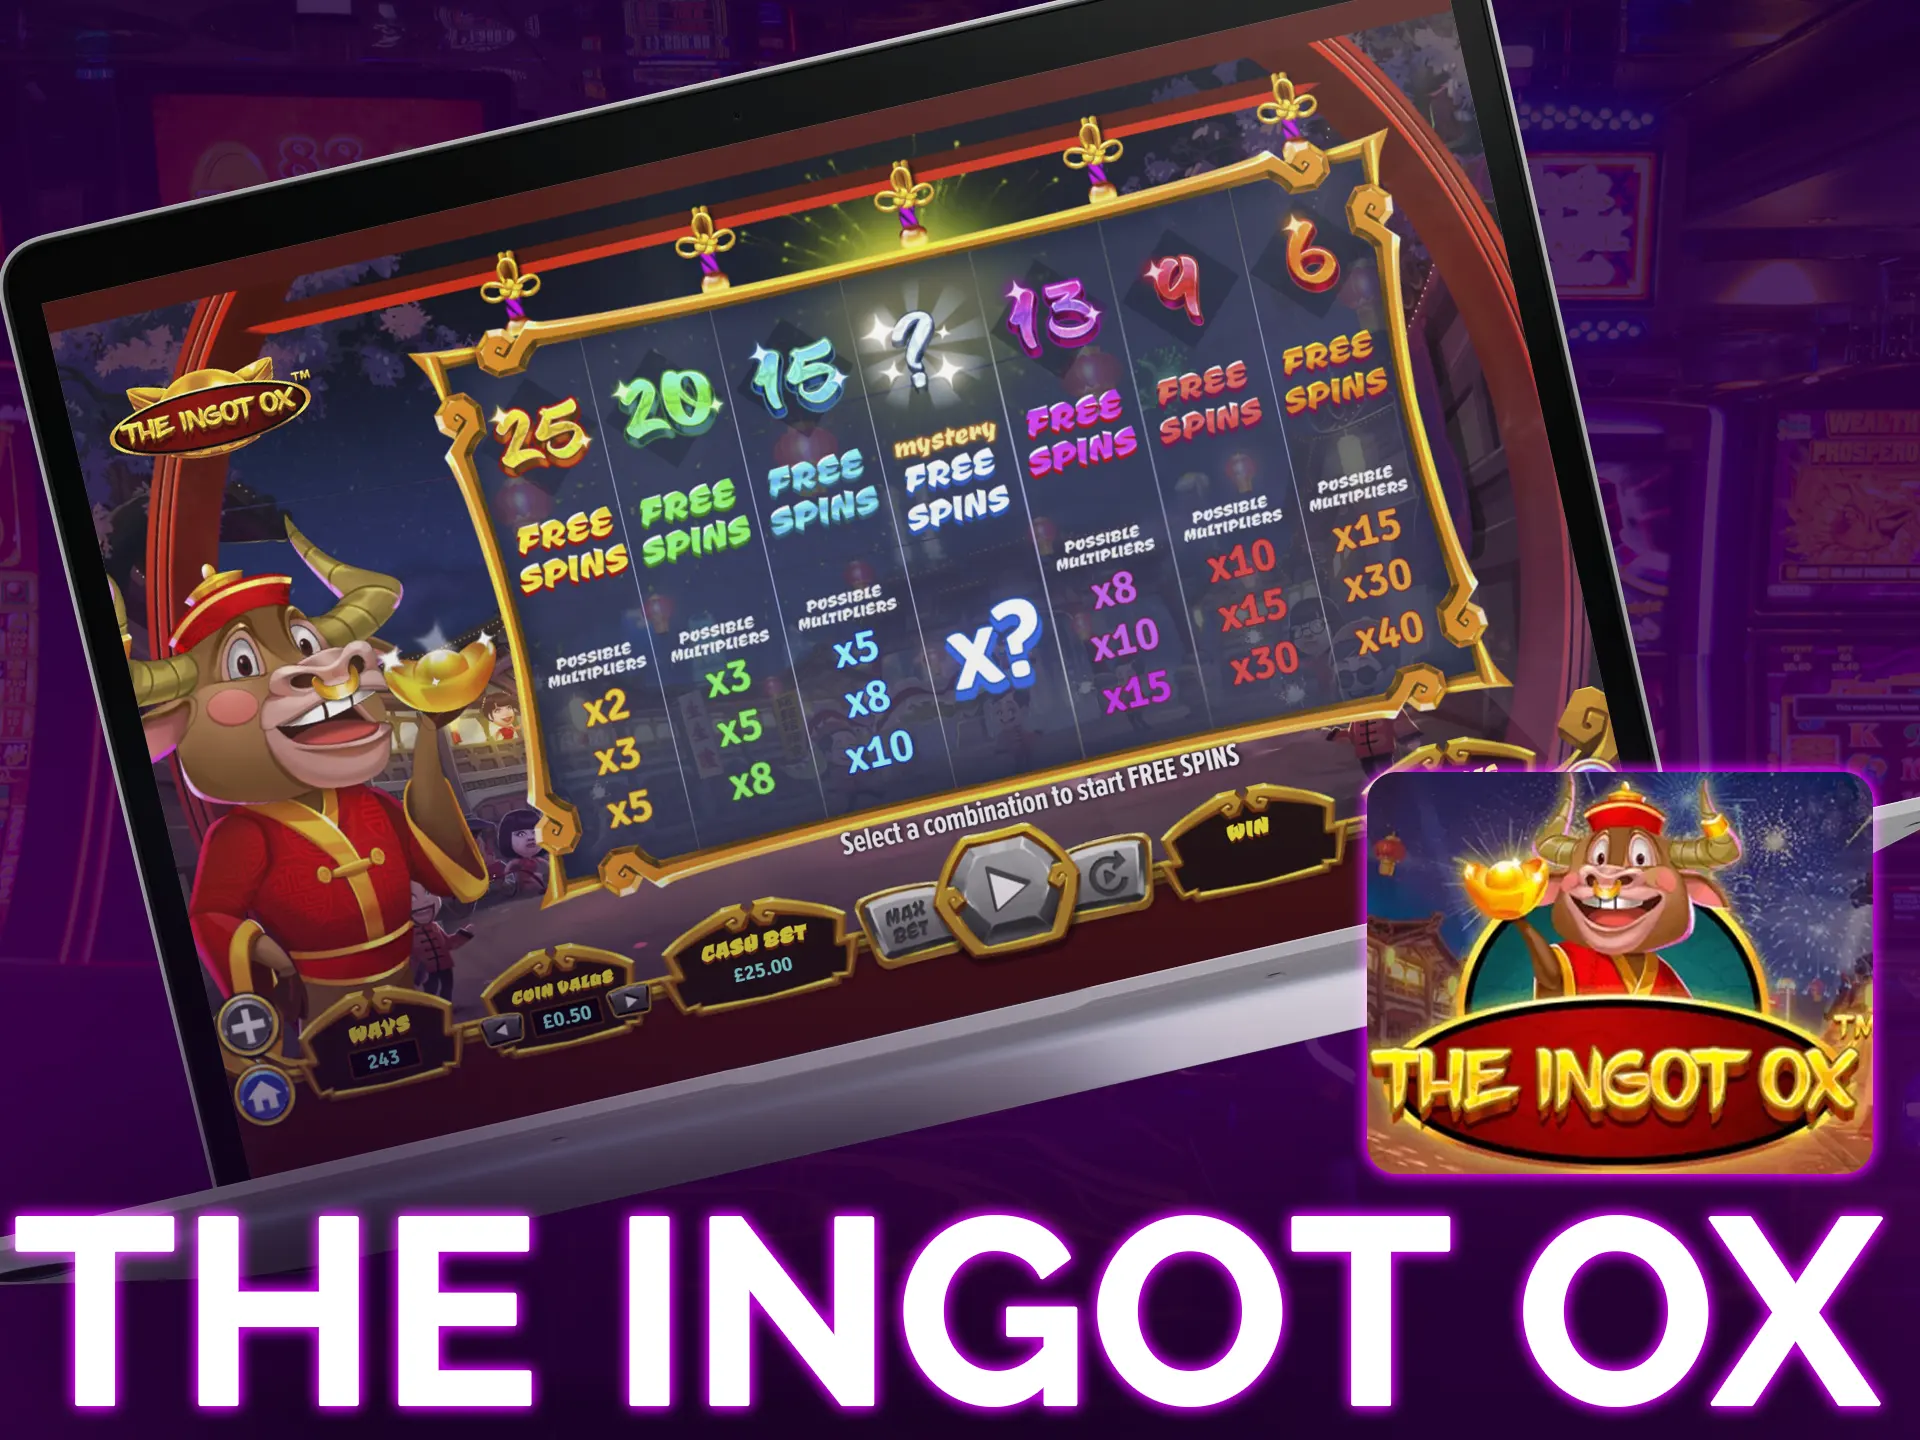 Experience Dragon Gaming's Ingot Ox, a high-volatility Chinese slot.